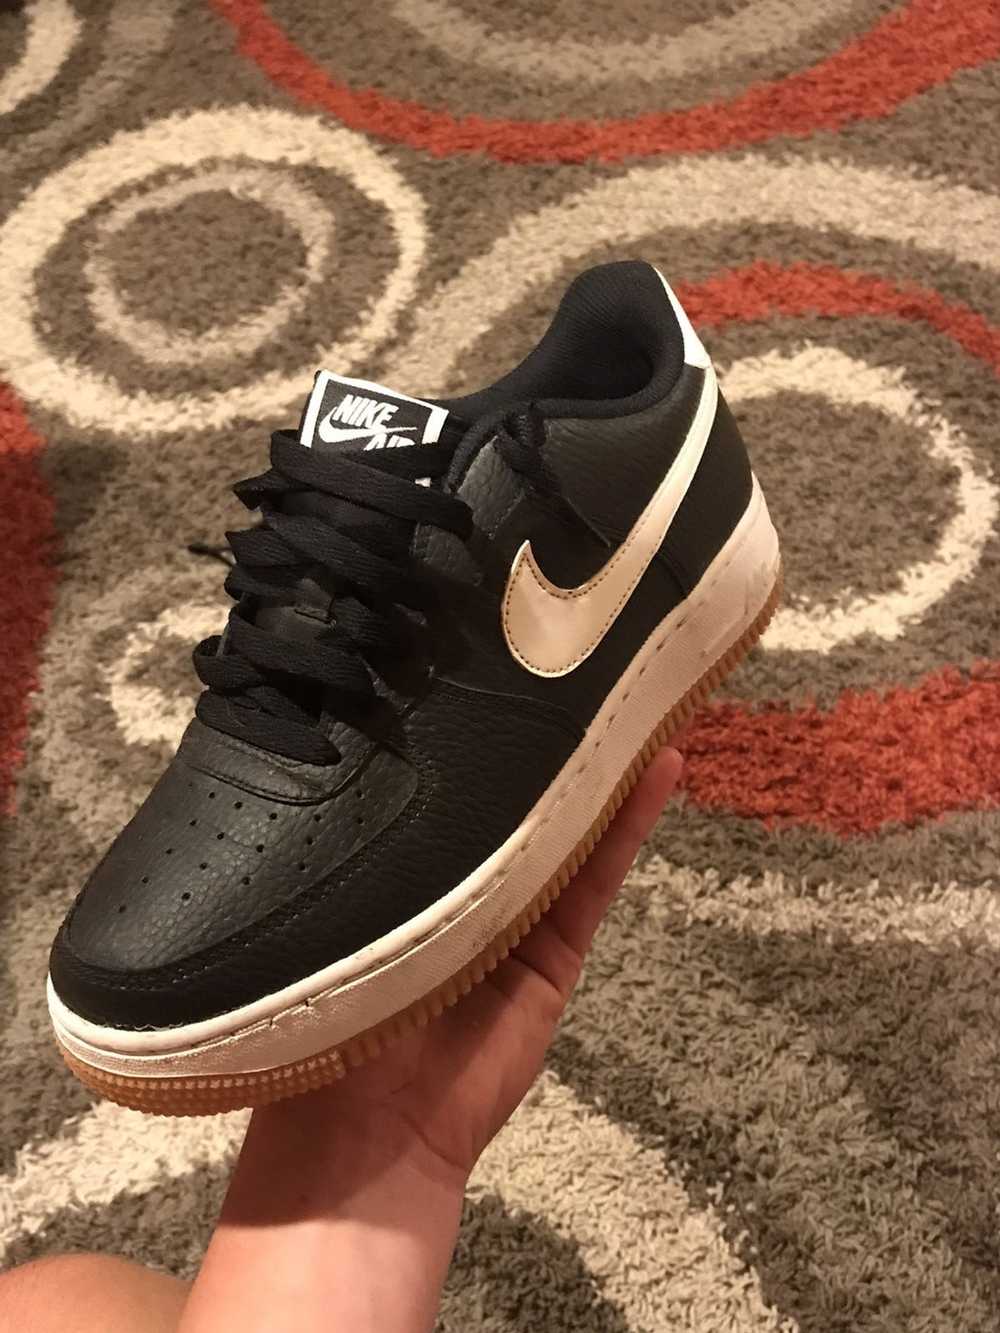 Nike Air Force 1s - image 2